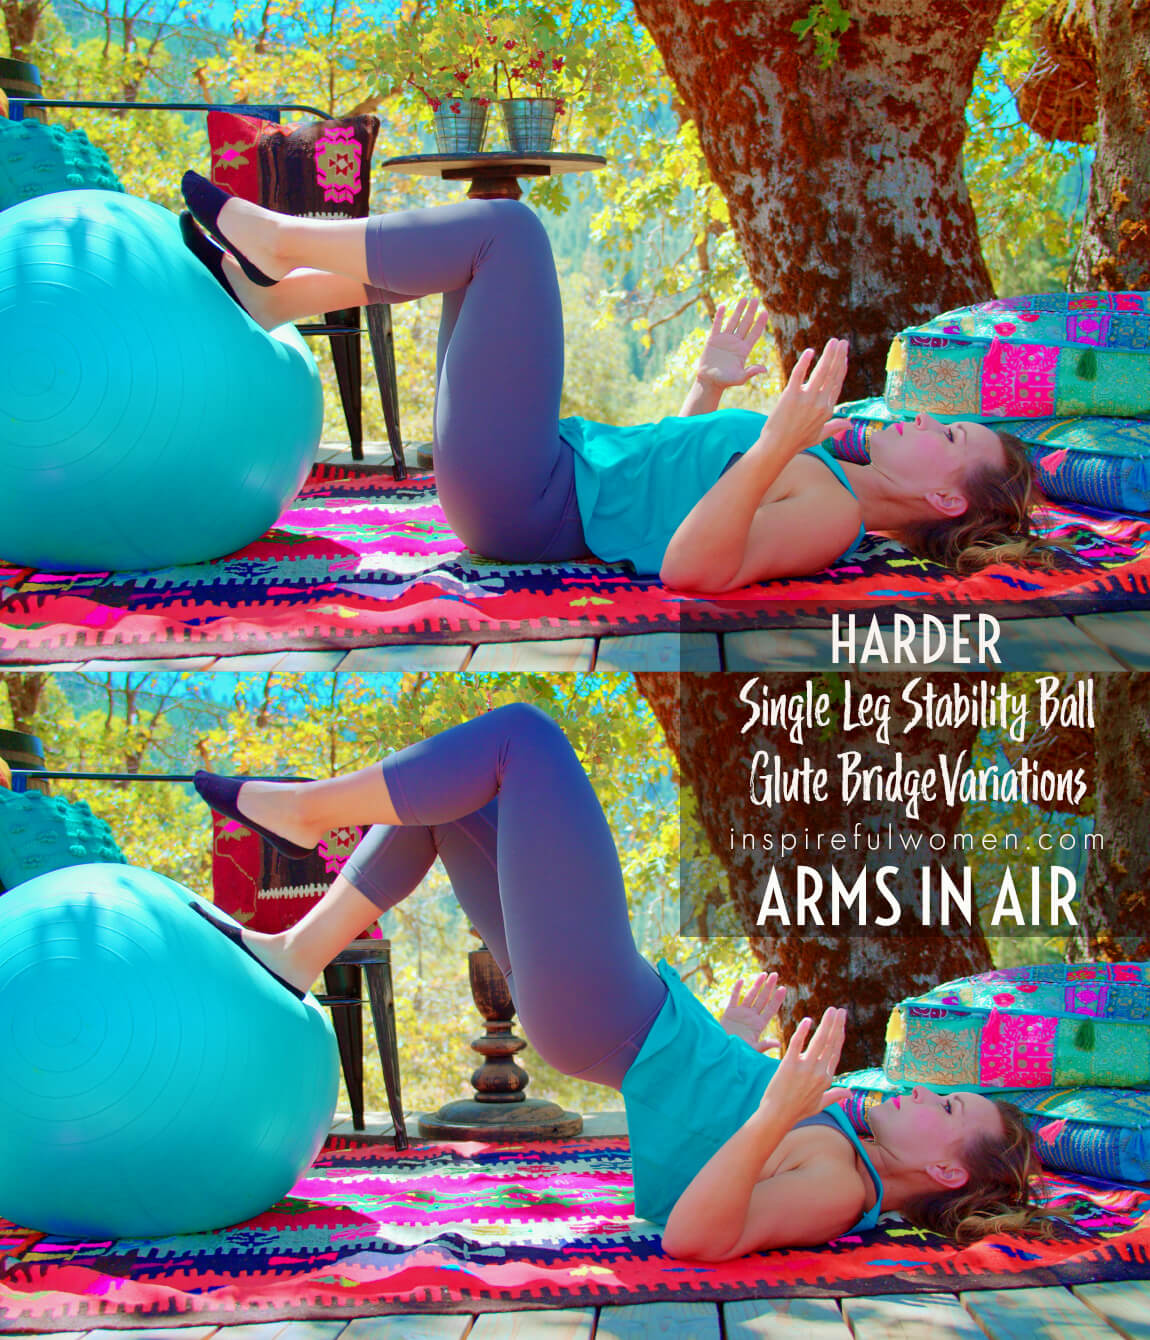 arms-in-air-single-leg-stability-ball-glute-bridge-exercise-harder